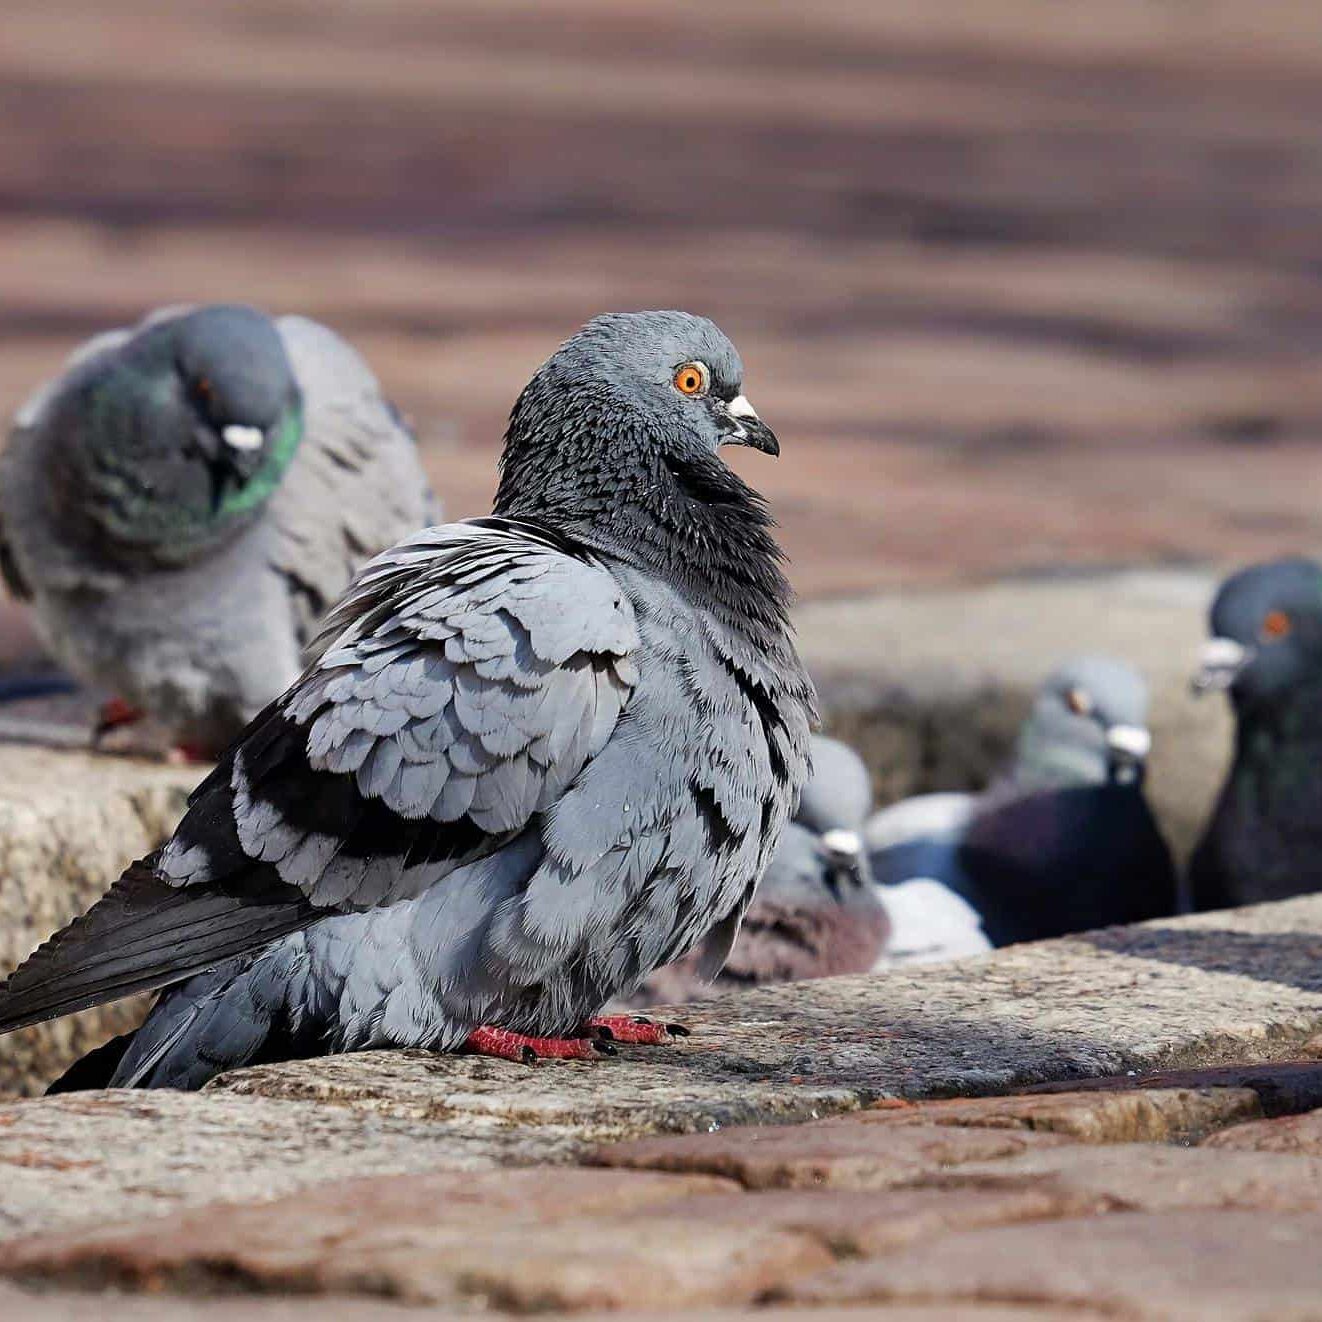 Resolve Pest Solutions offers a bird removal services to get rid of your Chicago bird issues